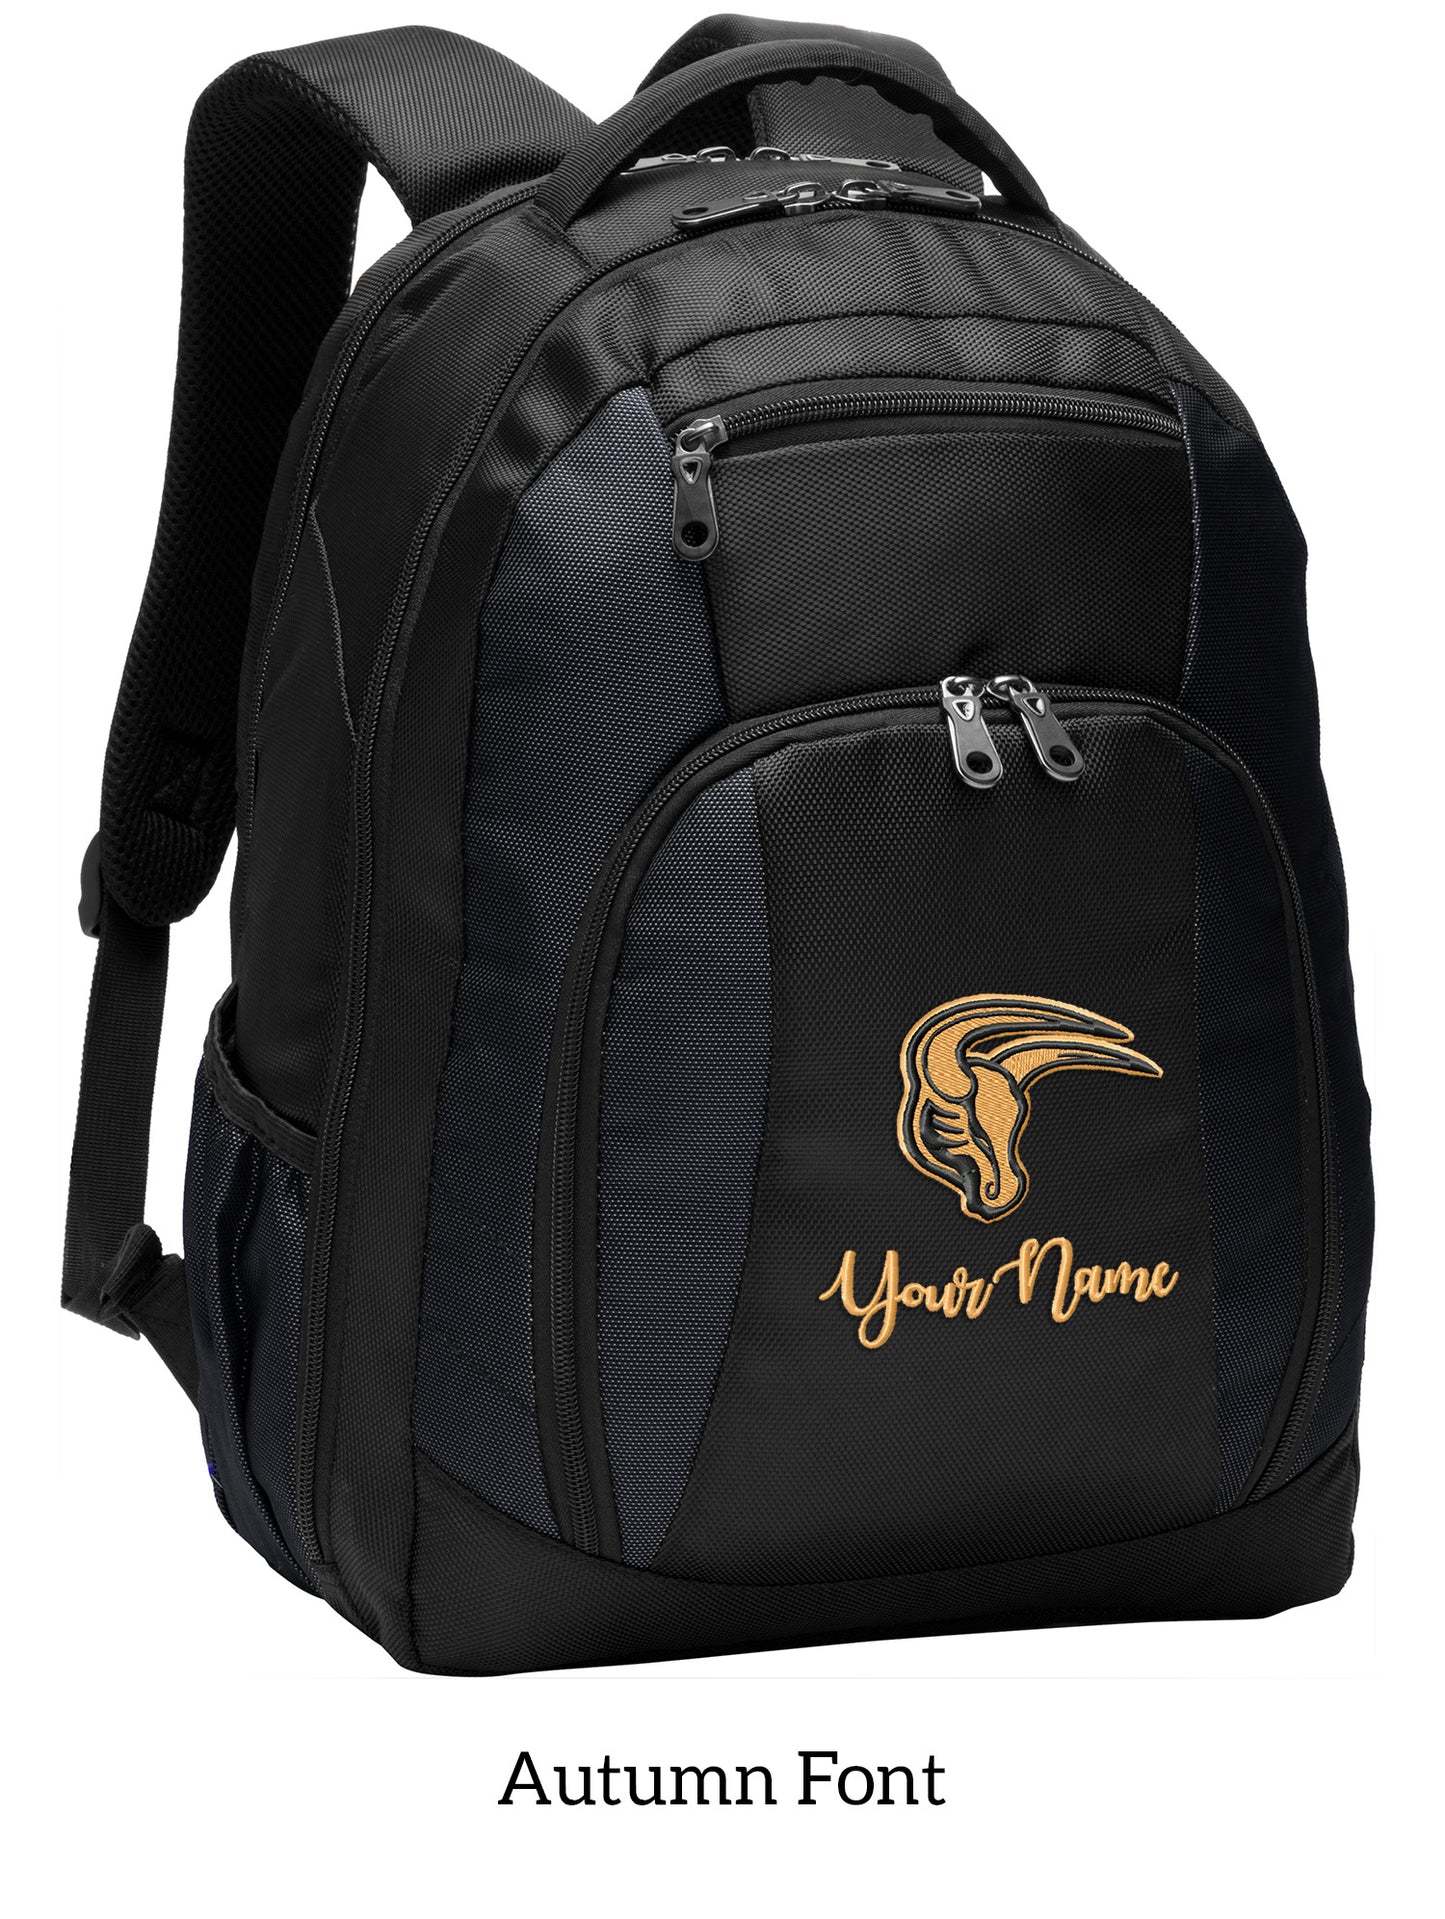 MSIS PTO-Maverick Commuter Black Backpack with Embroidery Design, Personalize with your Name!